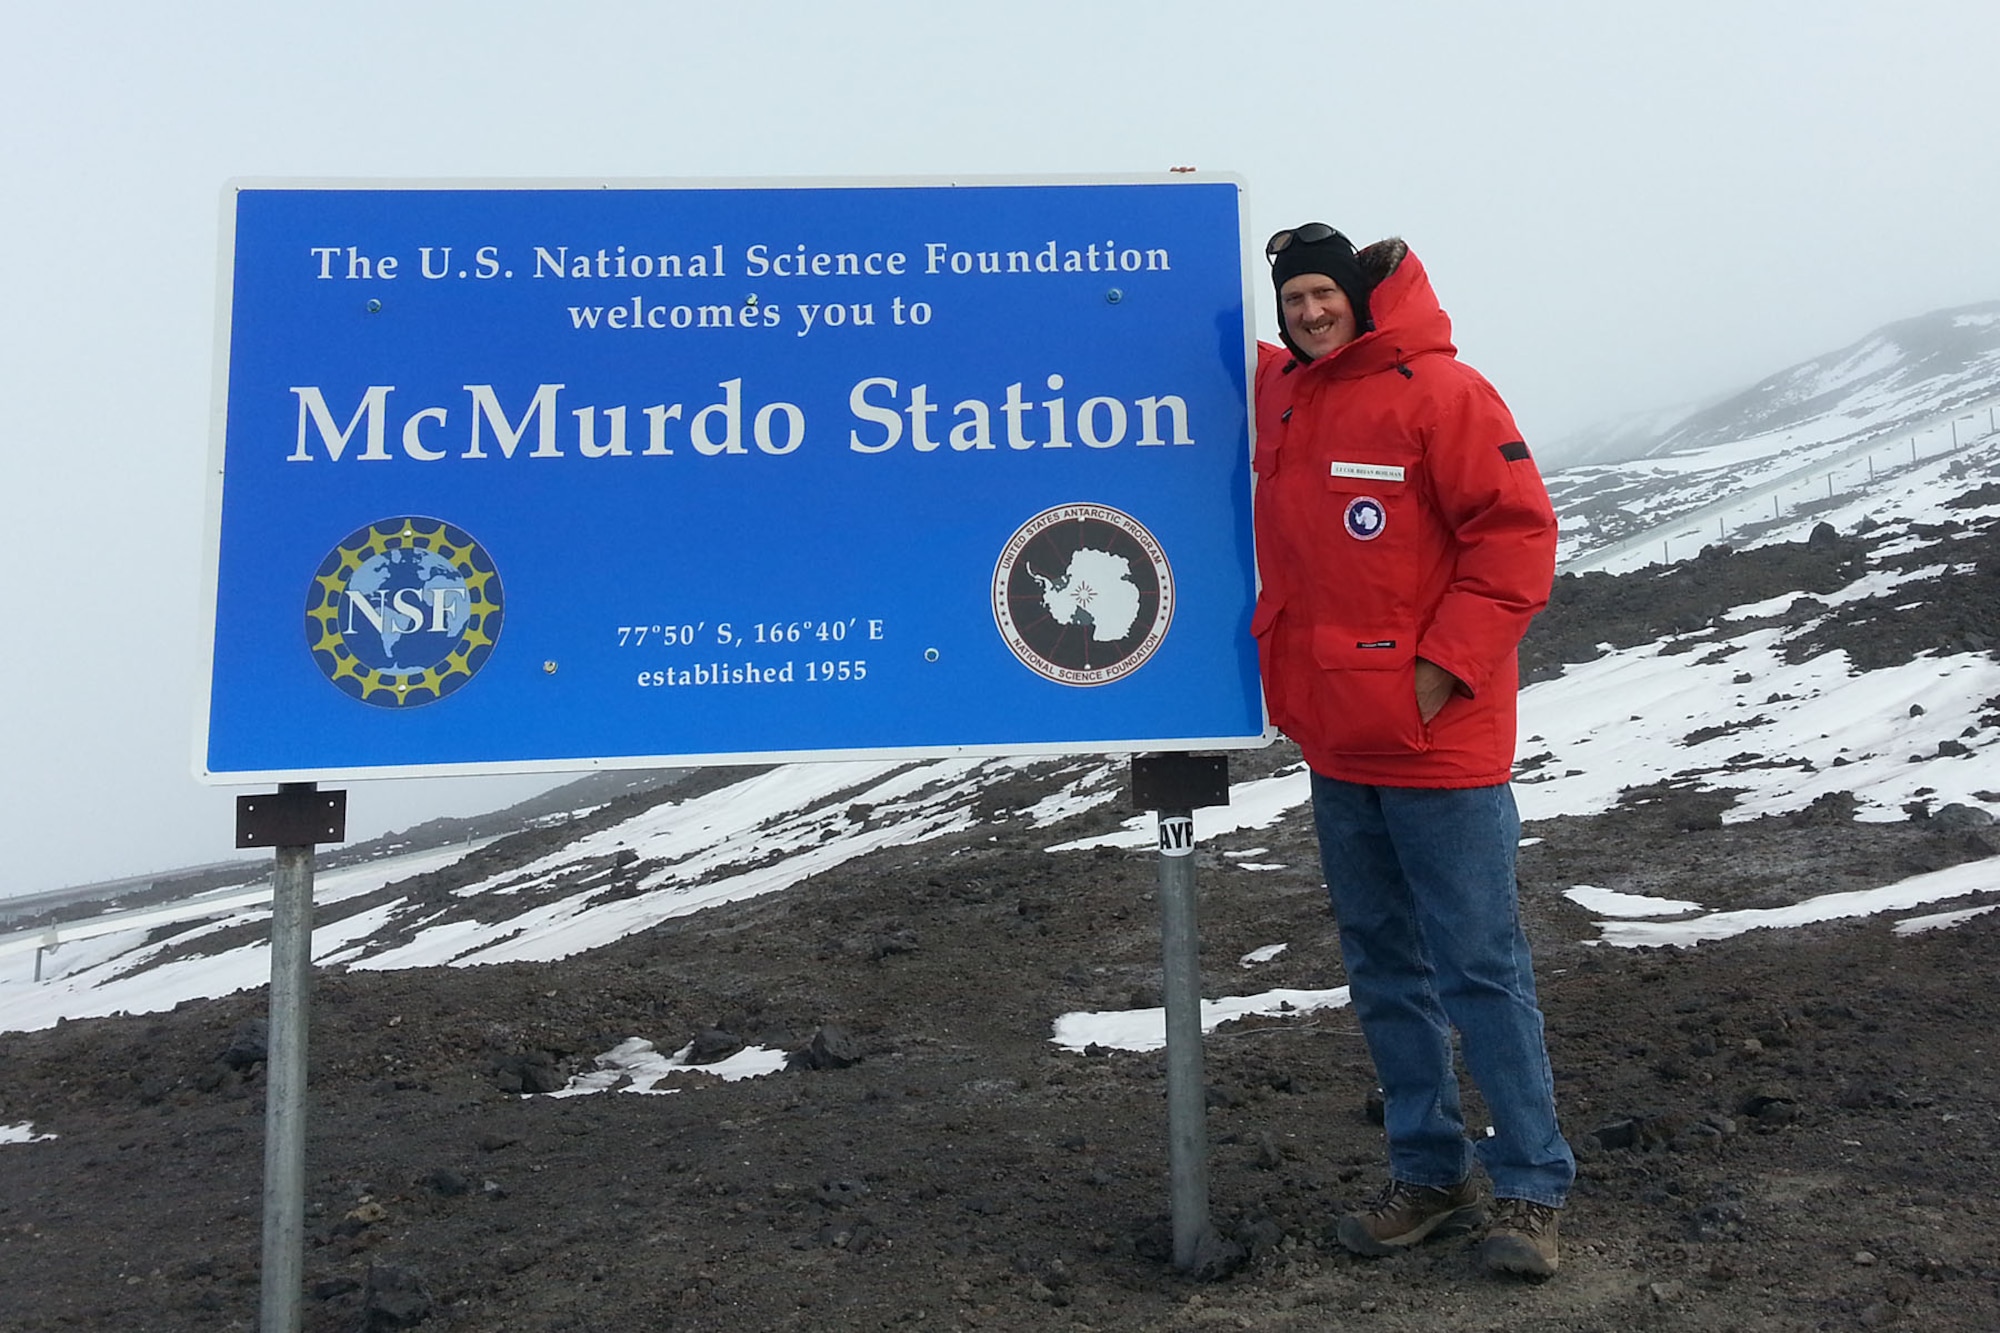 U.S. Air Force Lt. Col. Brian Bohlman, chaplain assigned to the 169th Fighter Wing, poses in front of the McMurdo Station sign in Antarctica, Oct. 22, 2016. (Courtesy photo of the National Science Foundation)